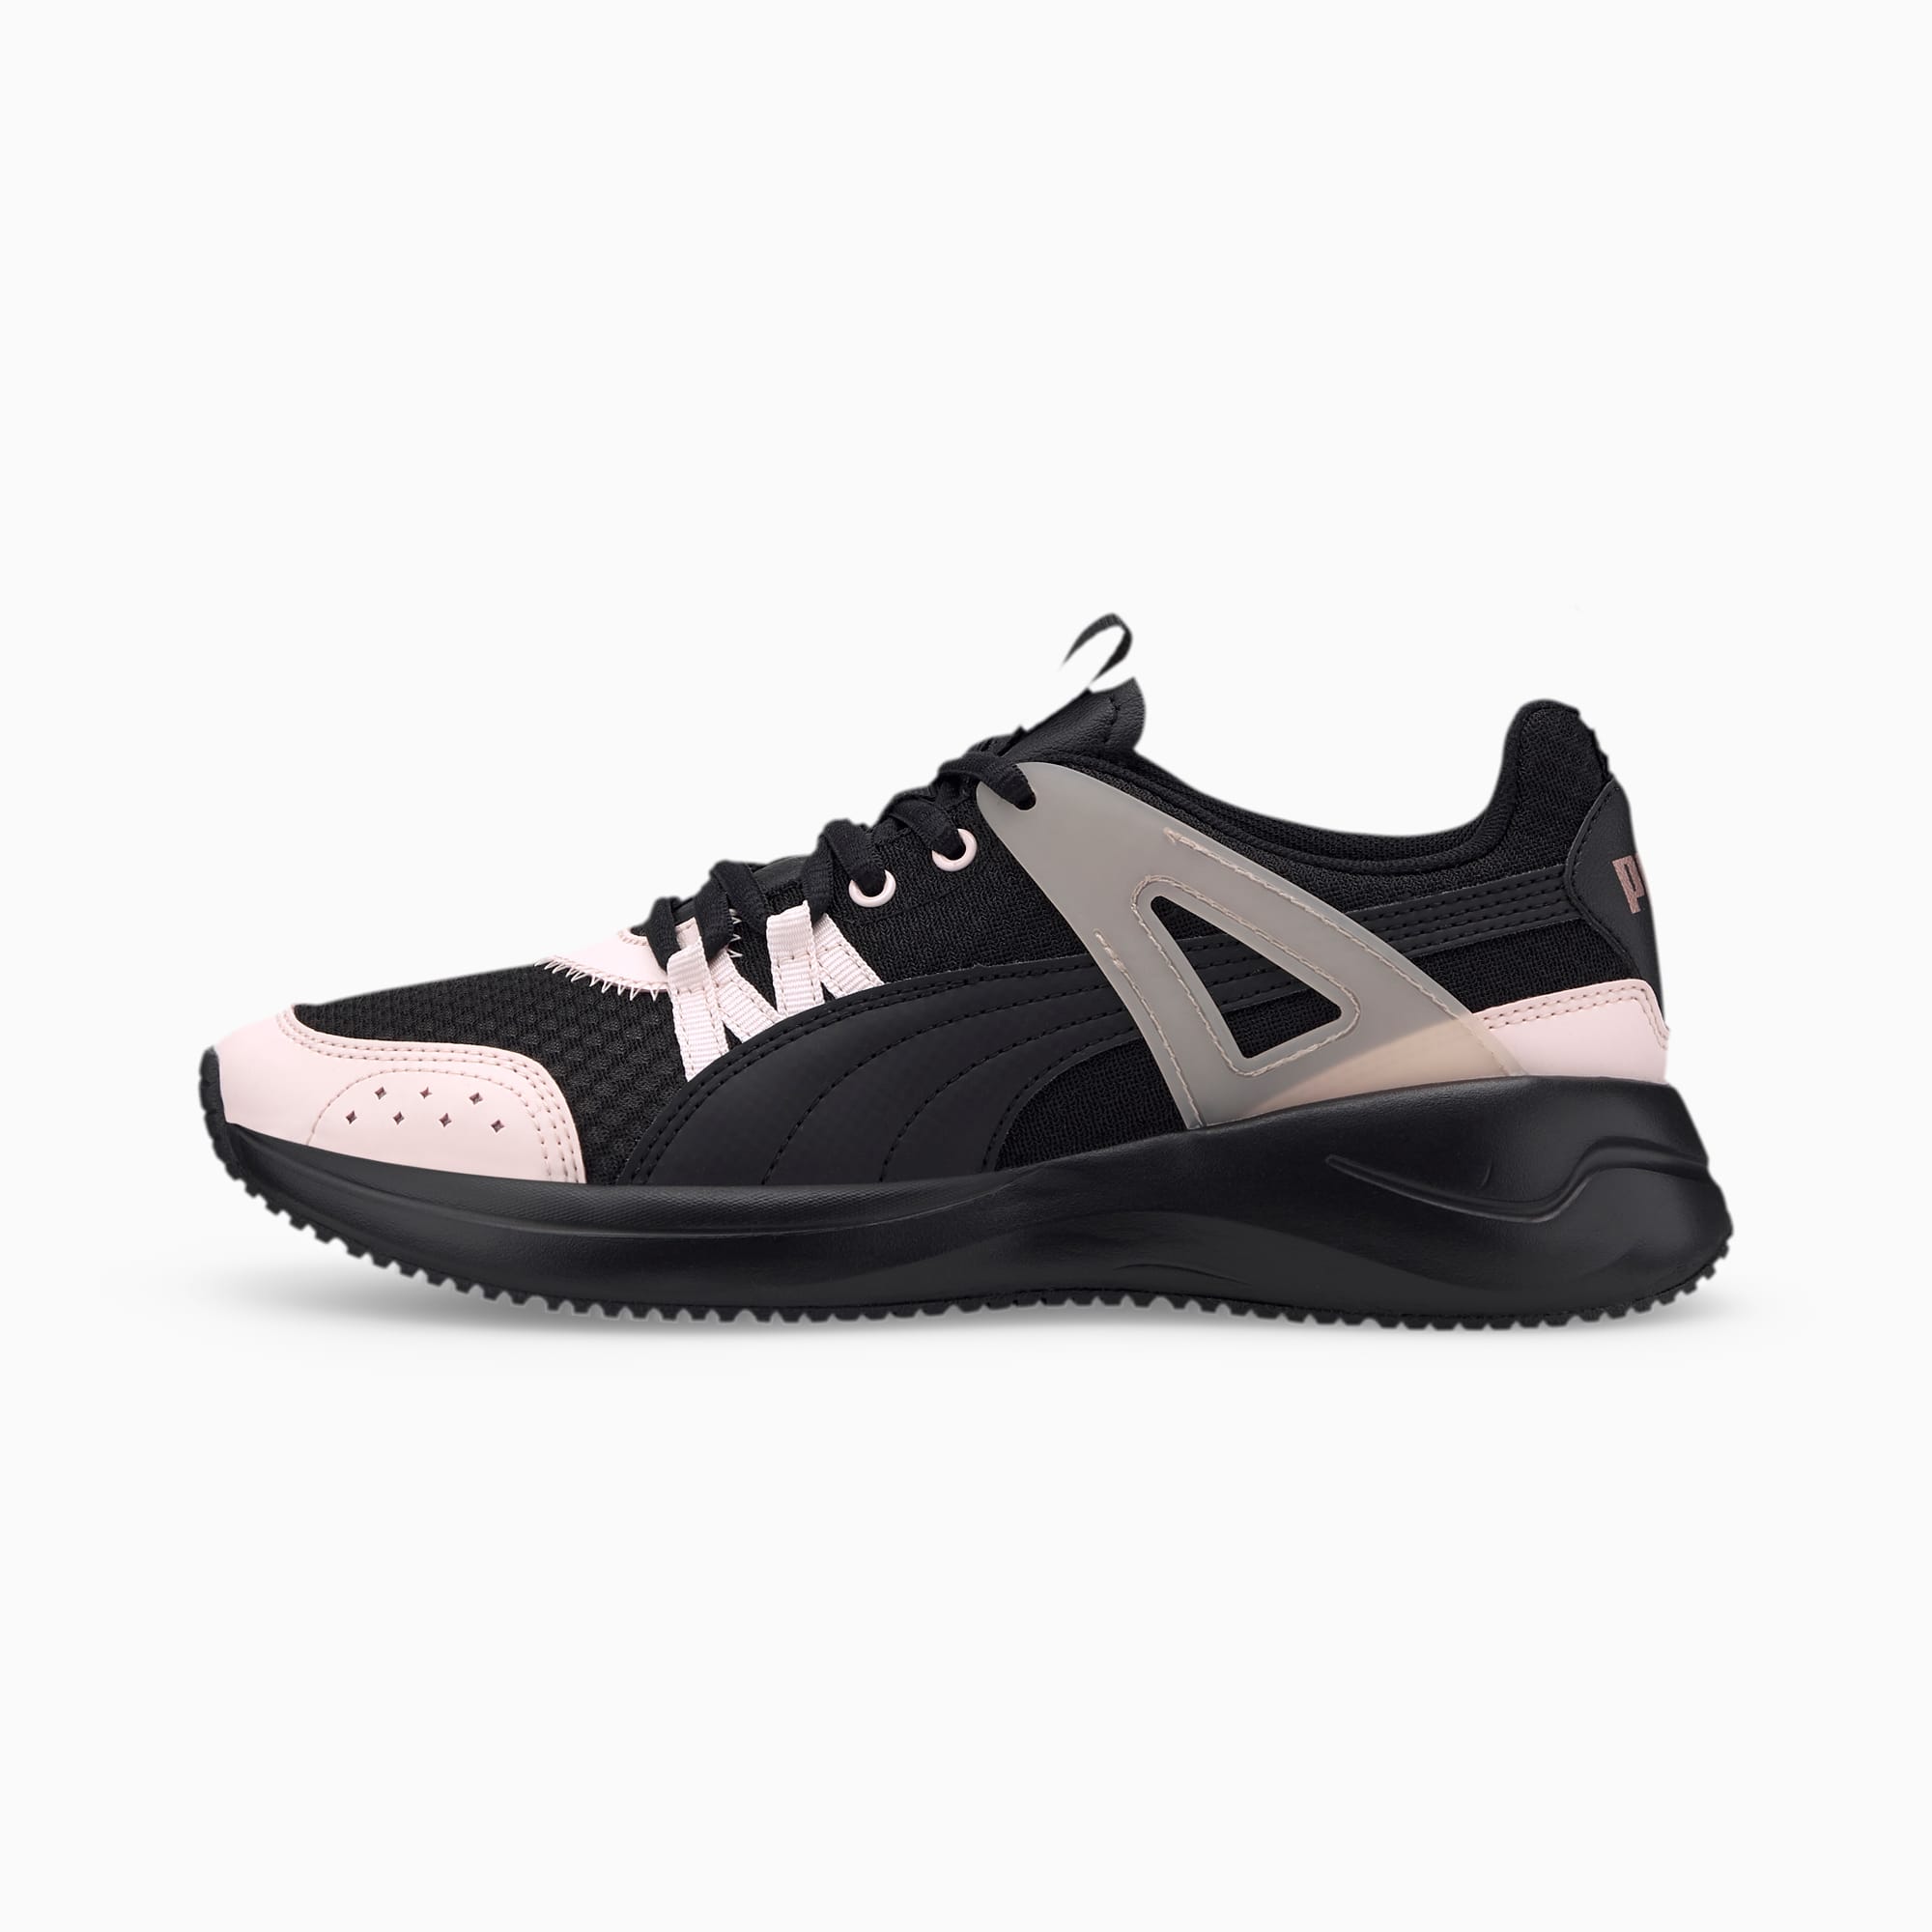 Nuage Run Cage Summer Women's Trainers 